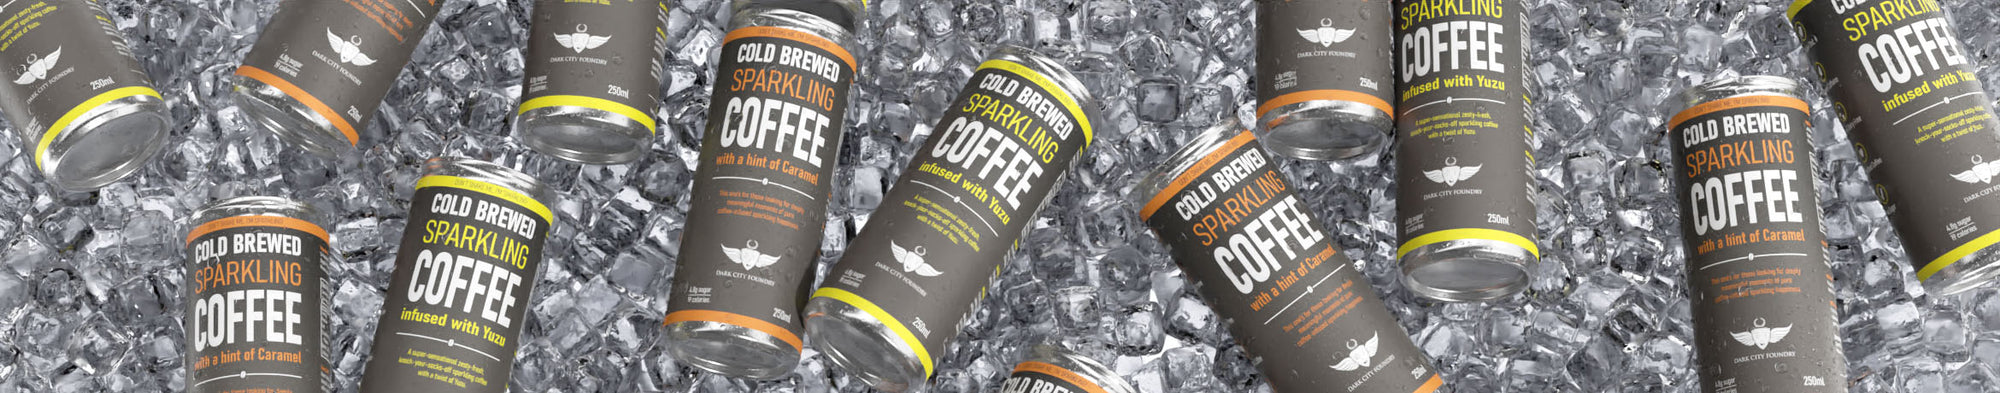 Dark City Foundry cold brew sparkling cans on ice. in image both yuzu and caramel flavours